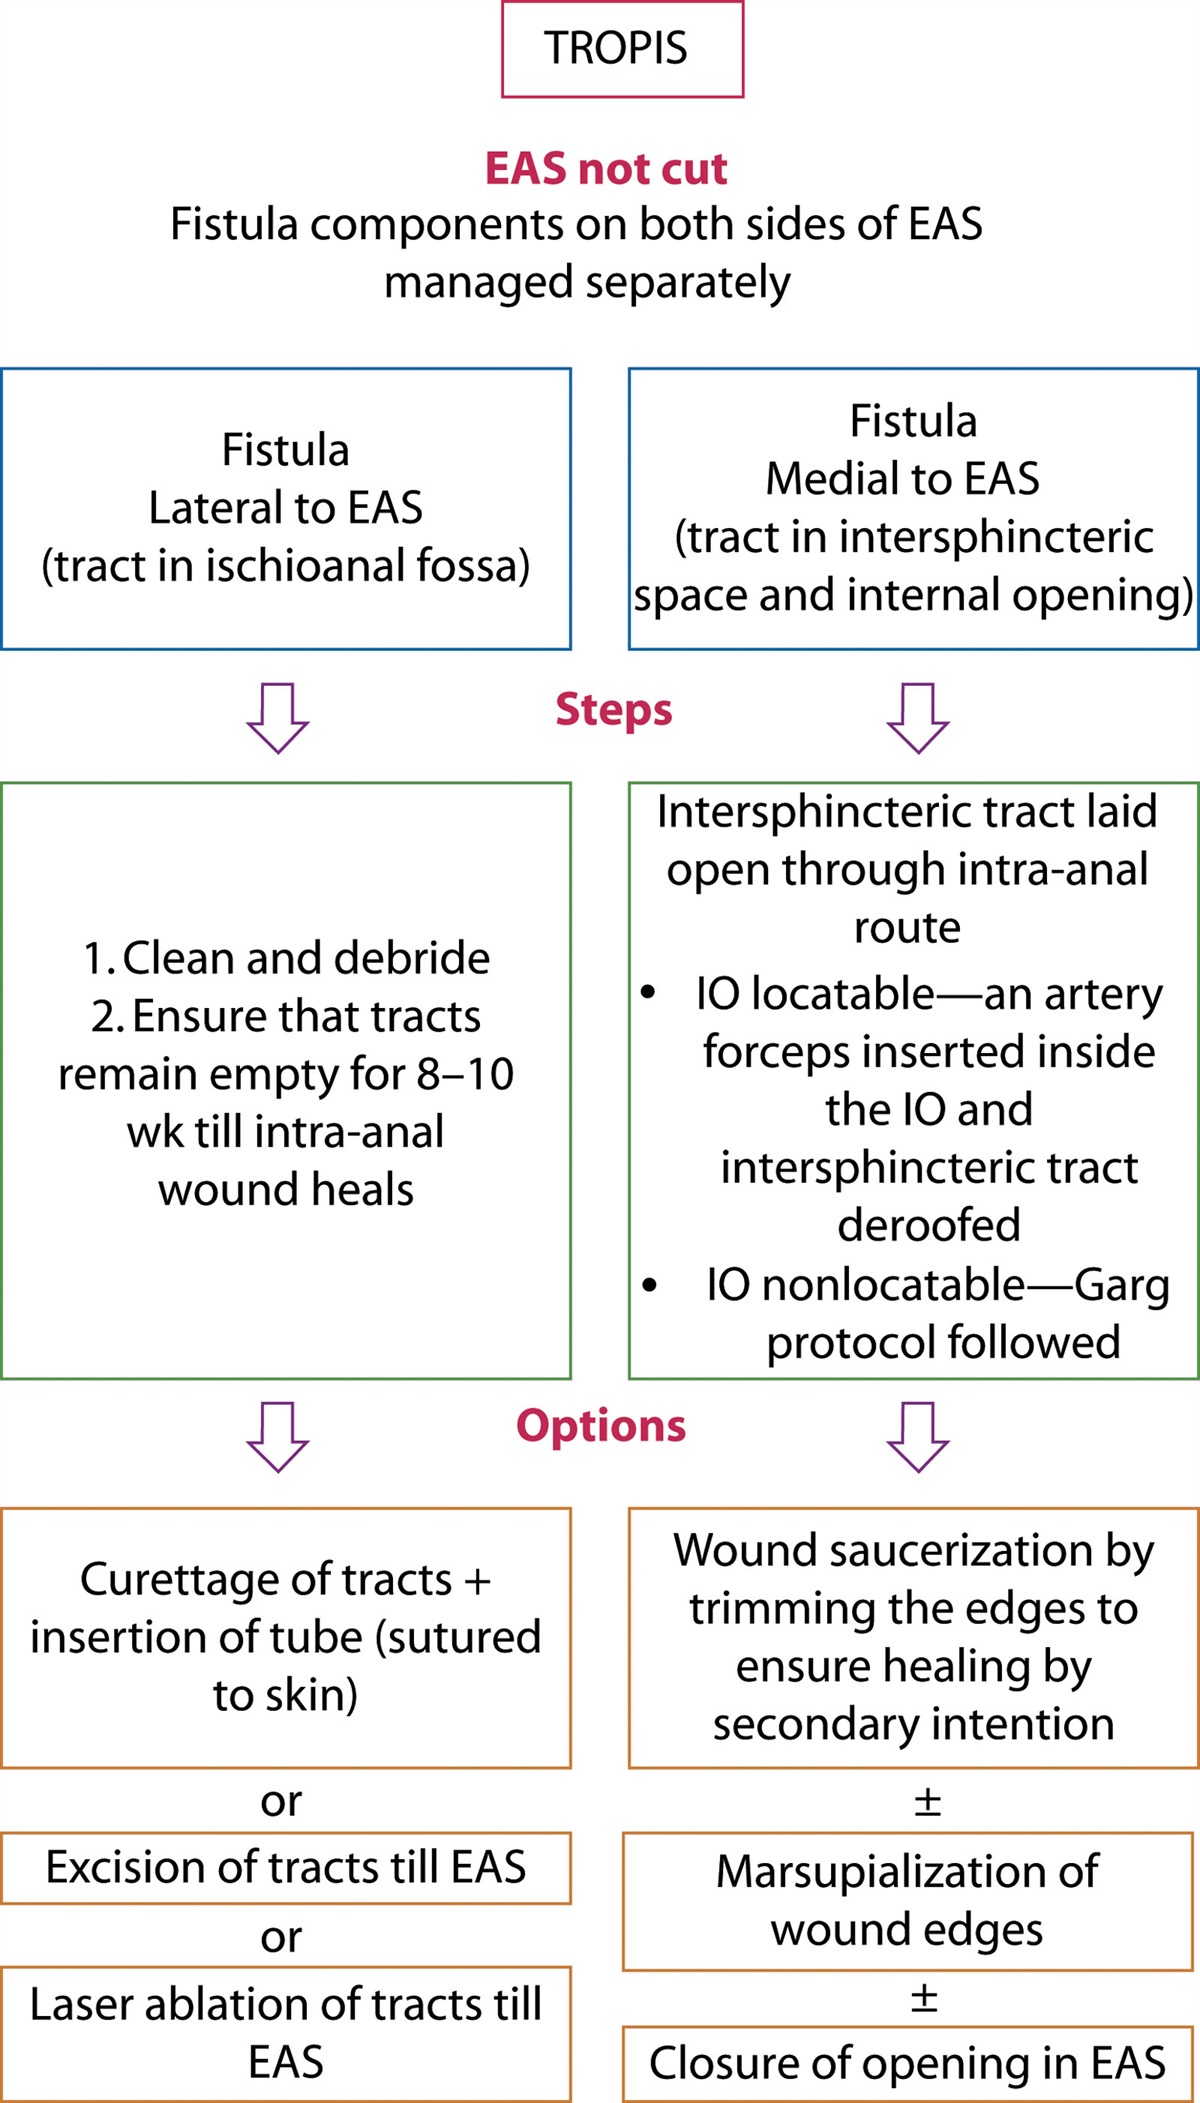 Transanal Opening of Intersphincteric Space: A Novel Procedure to Manage Highly Complex Anal Fistulas